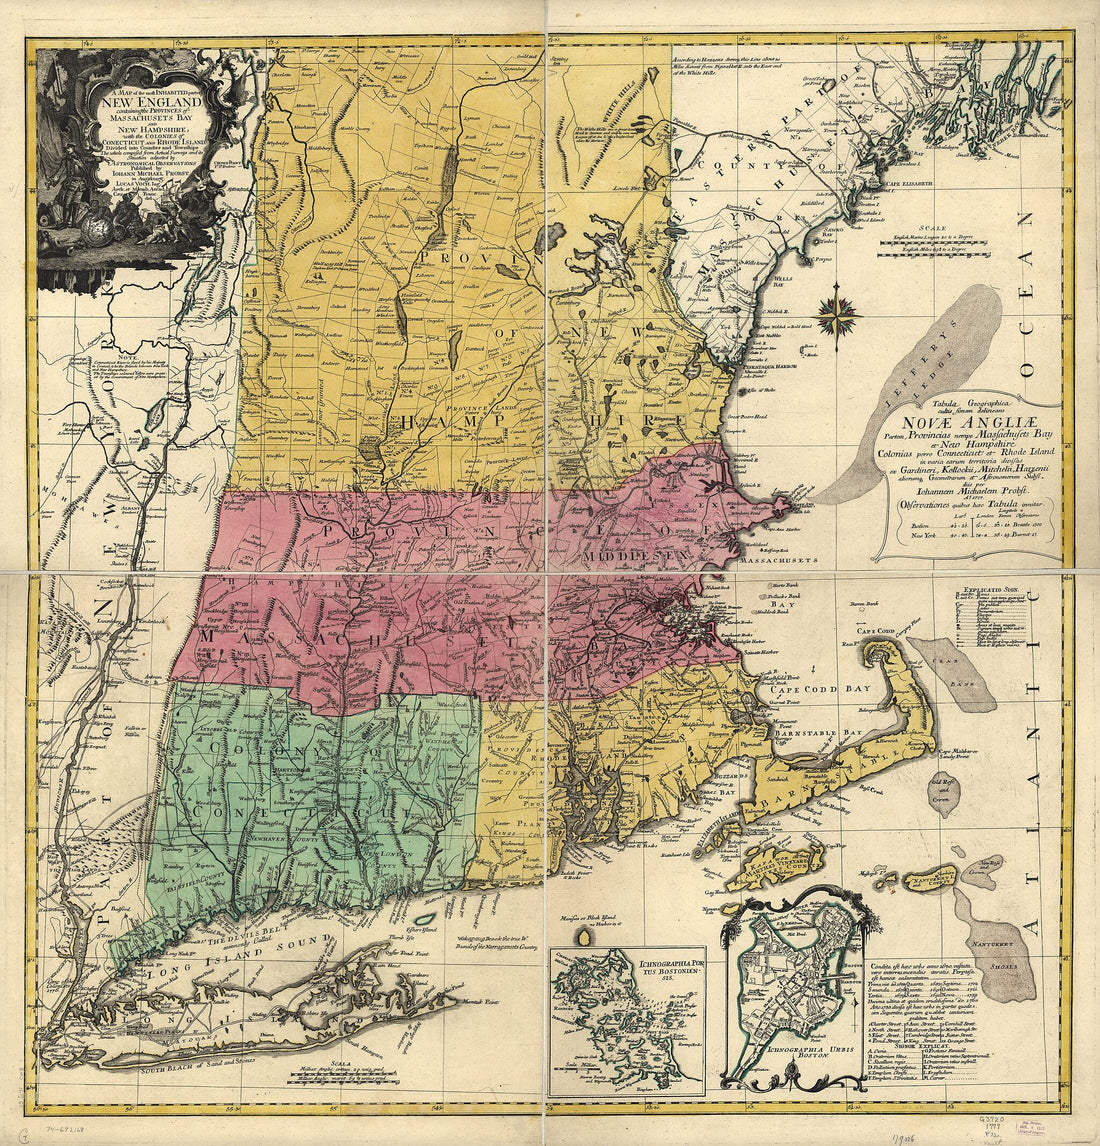 This old map of A Map of the Most Inhabited Part of New England, Containing the Provinces of Massachusets Bay and New Hampshire, With the Colonies of Conecticut and Rhode Island, Divided Into Counties and Townships; the Whole Composed from Actual Surveys